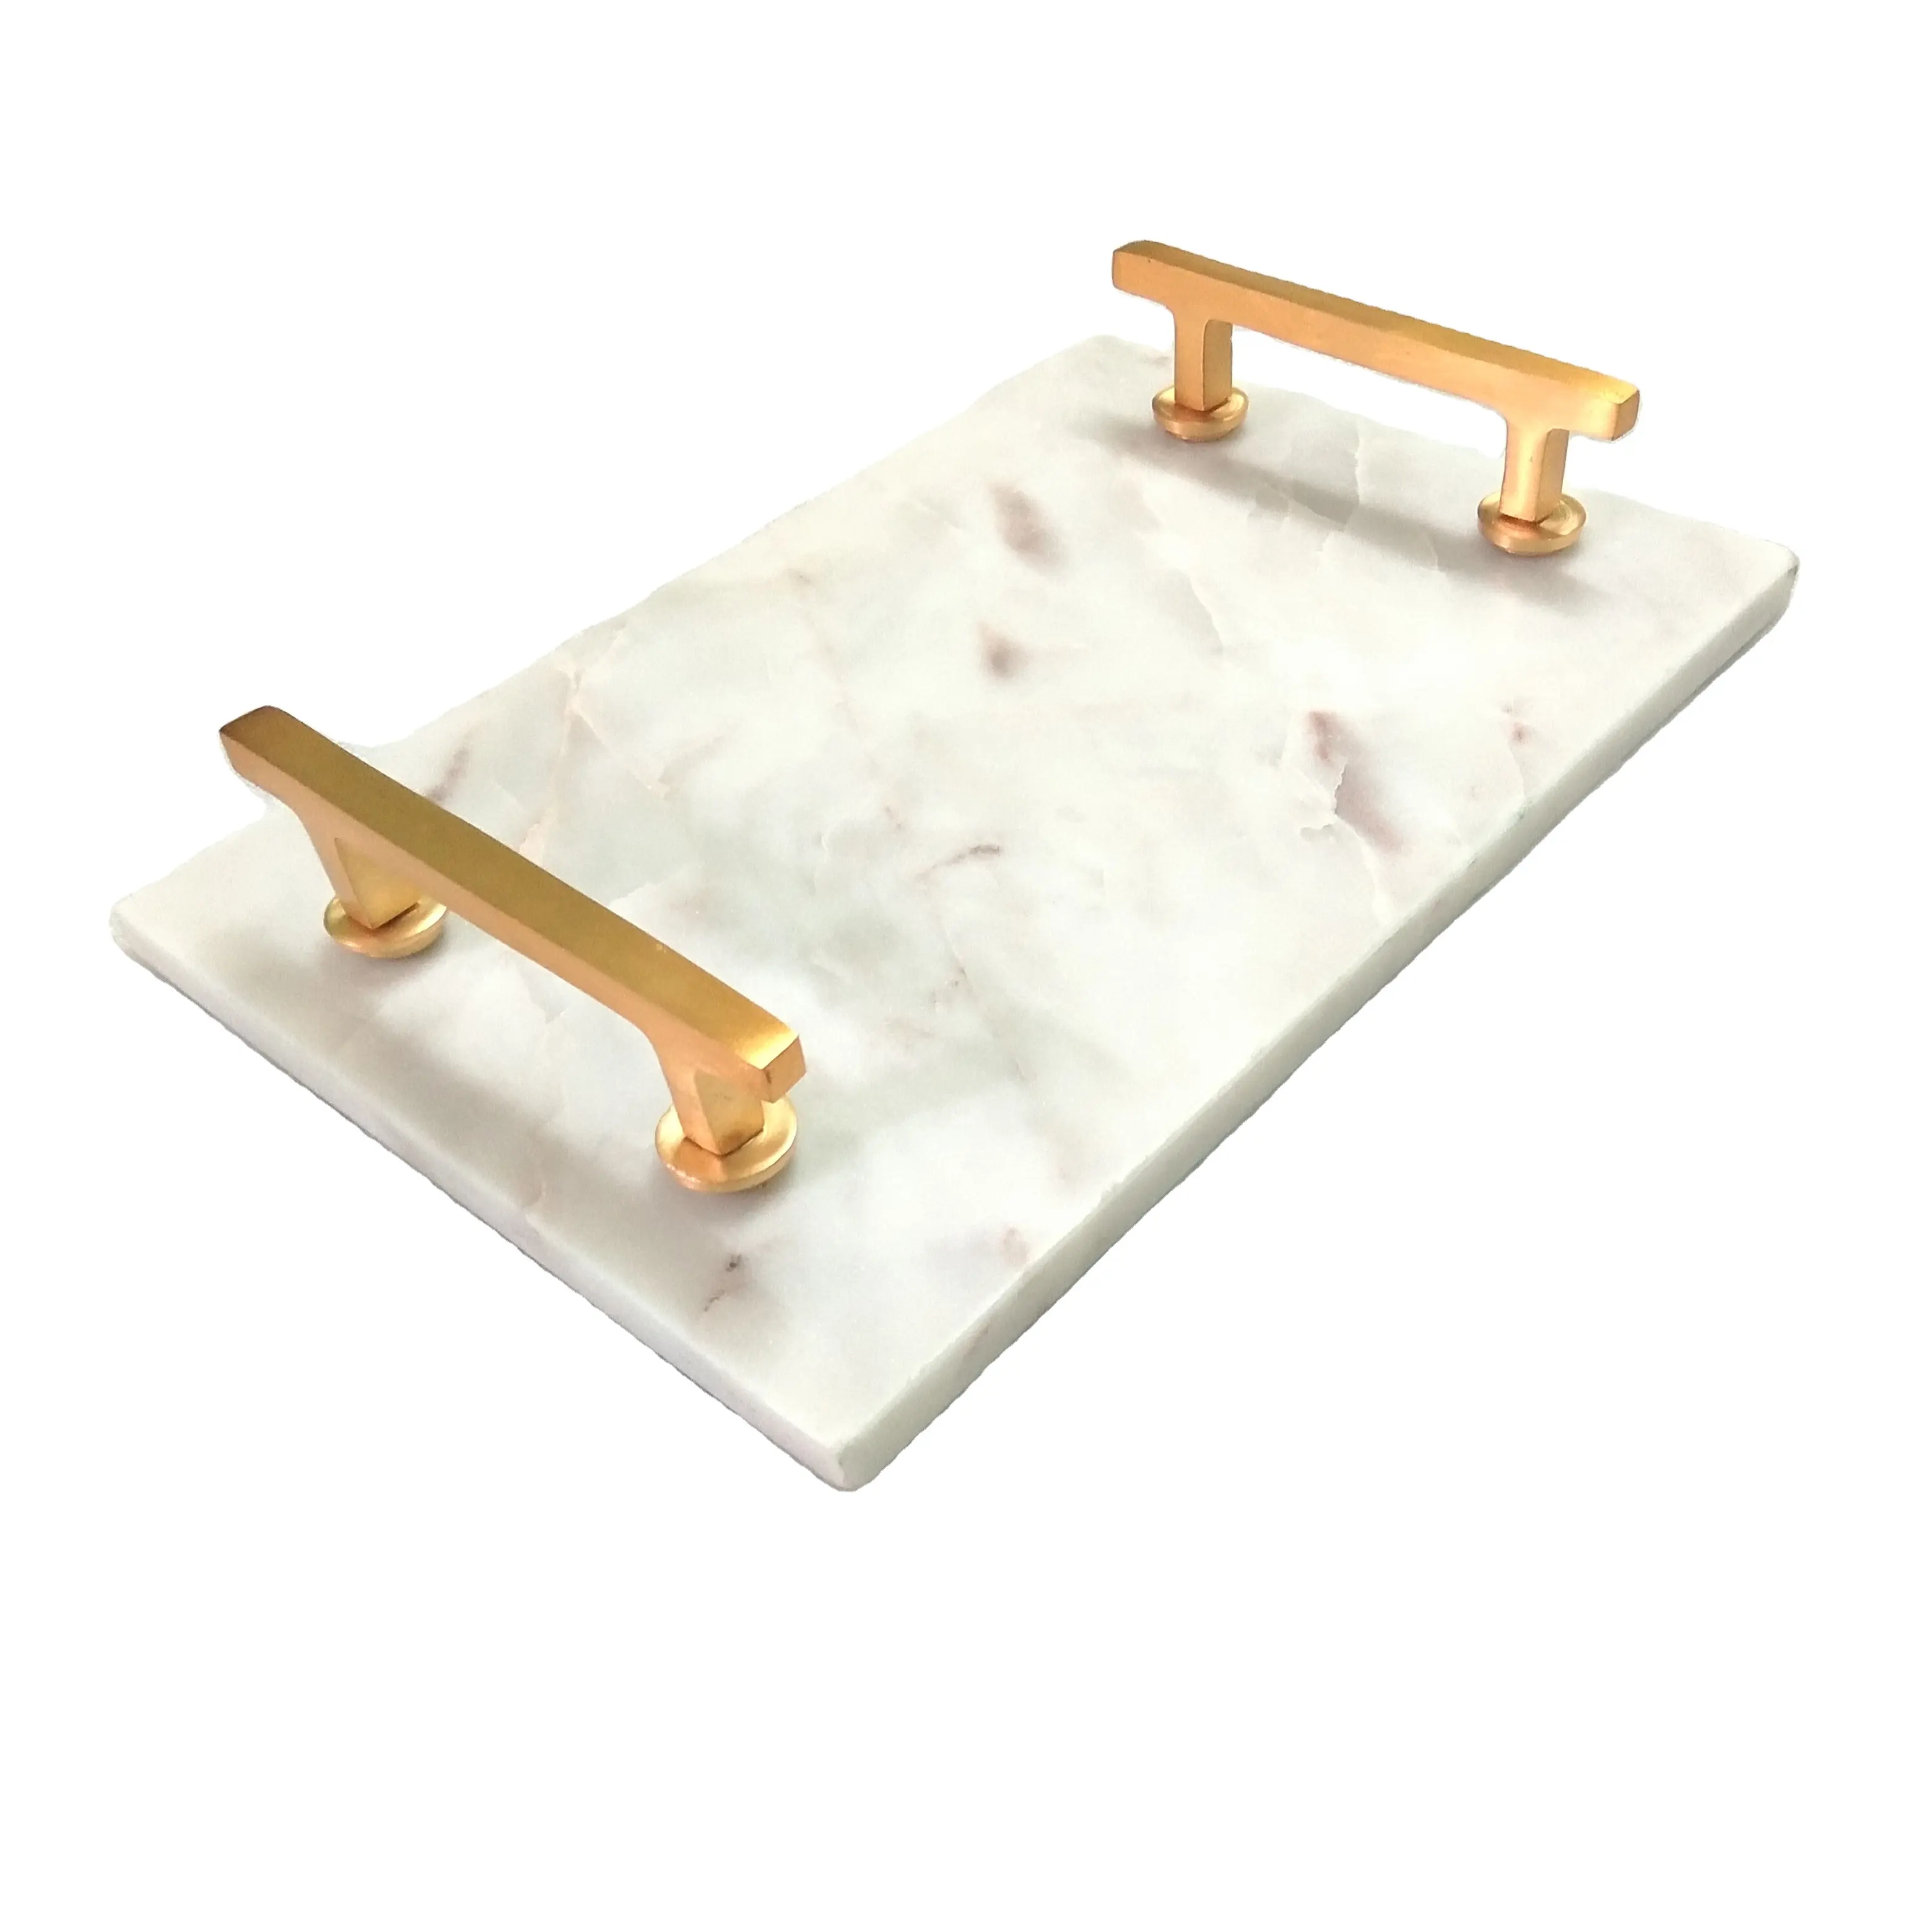 marble tray with gold plated handles touseef international crafts stone tray home hotel gifting decor serving unique art crafts